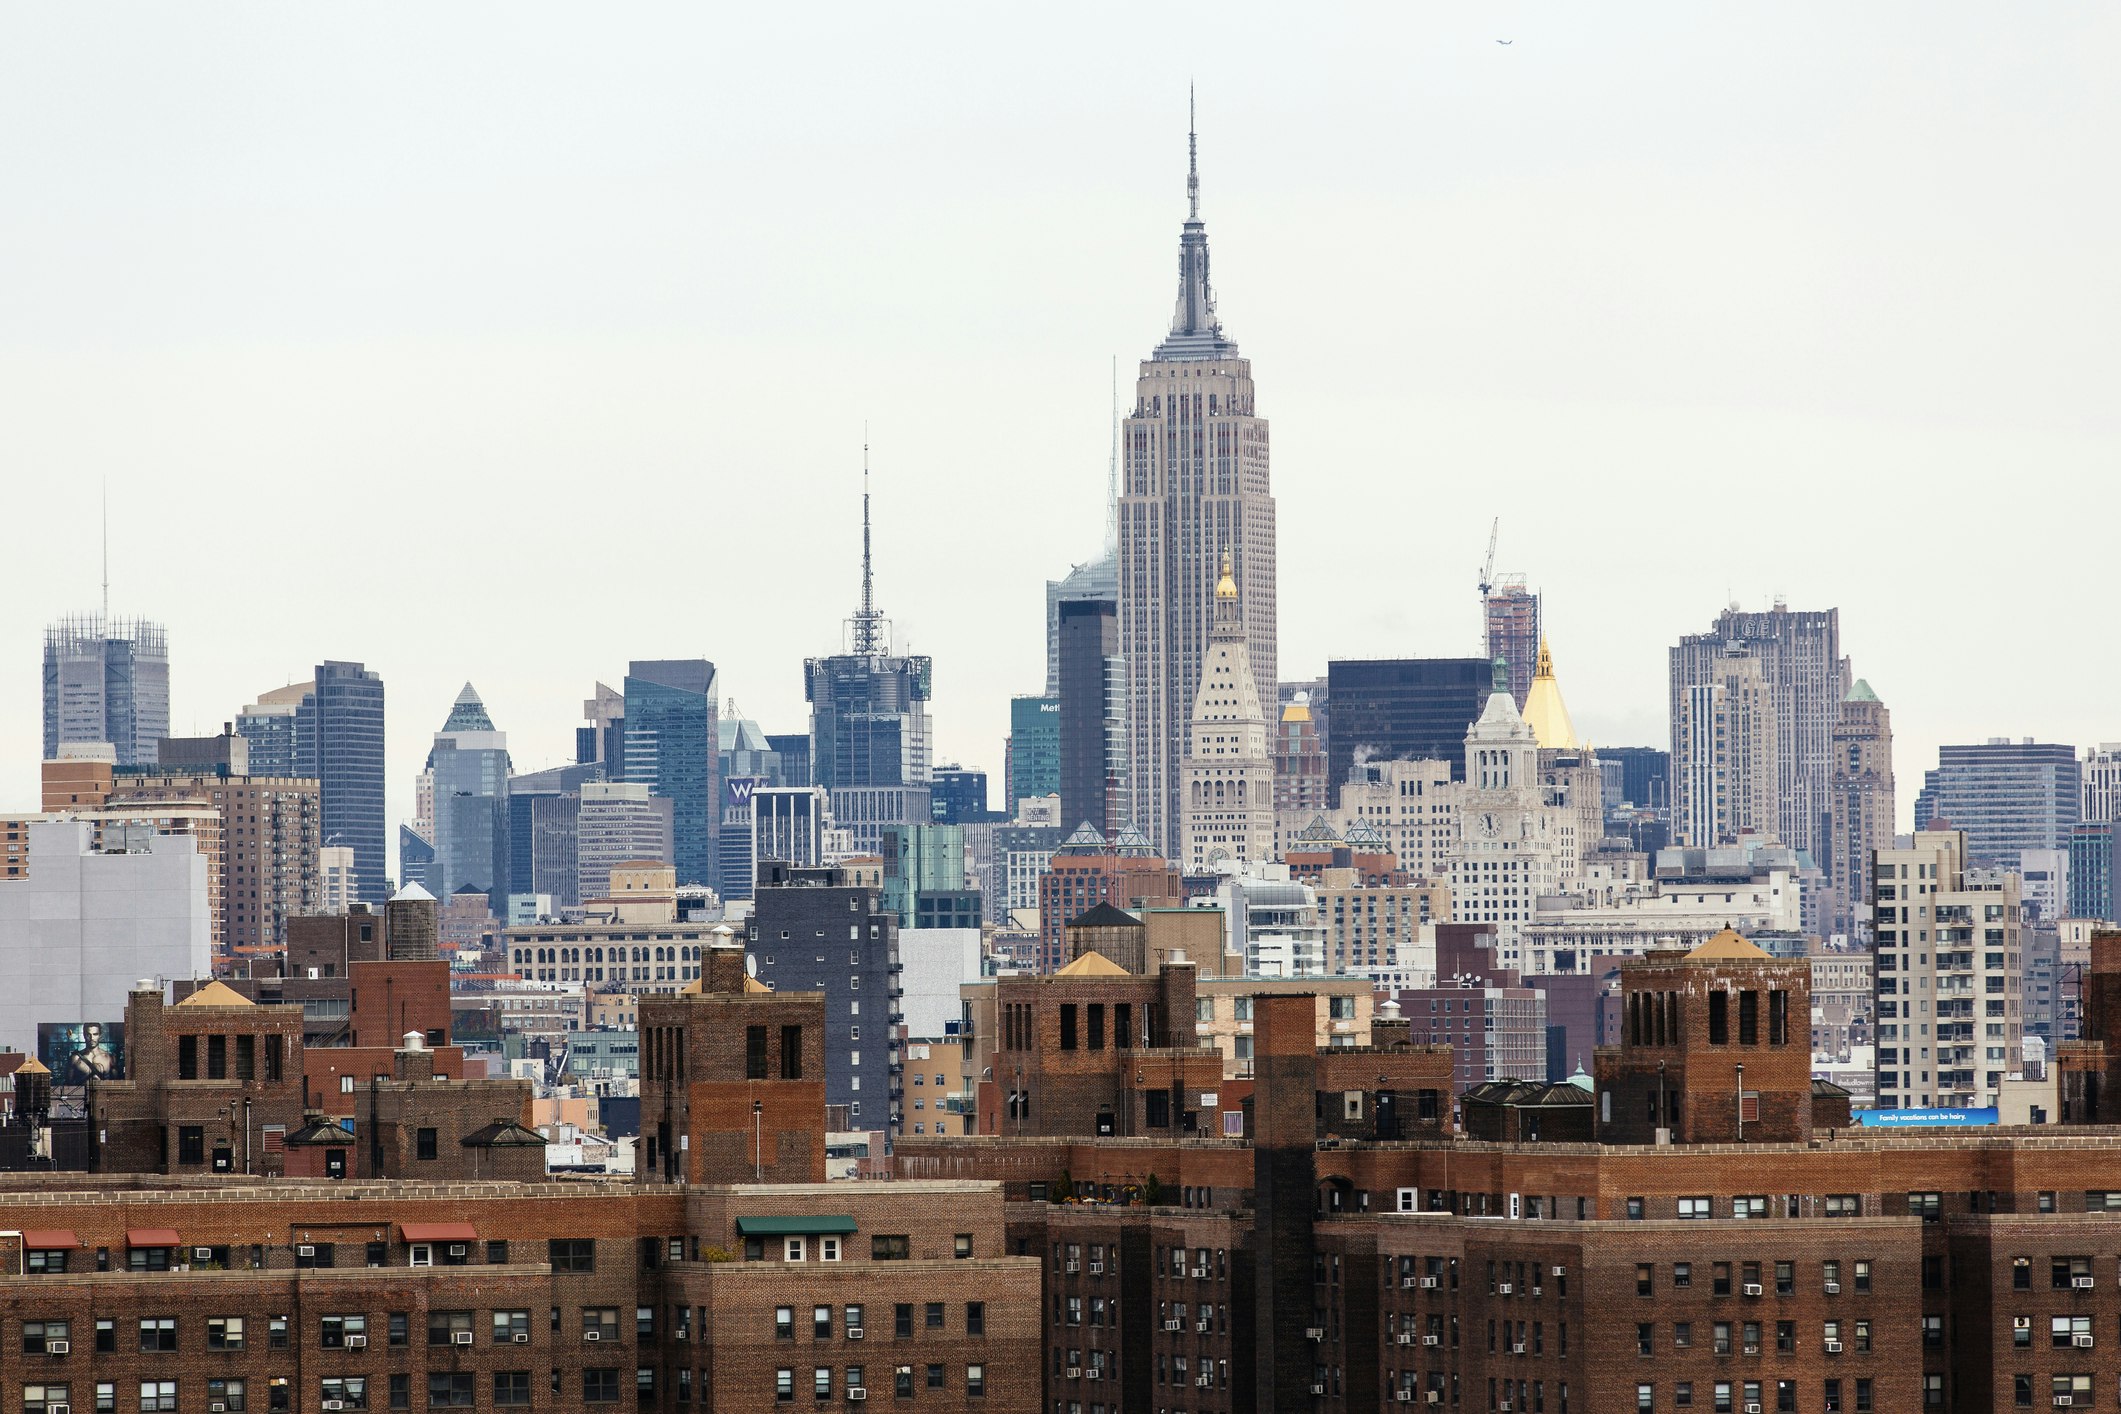 Manhattan skyline with Lower East Side on foreground and Empire State Building in the background.